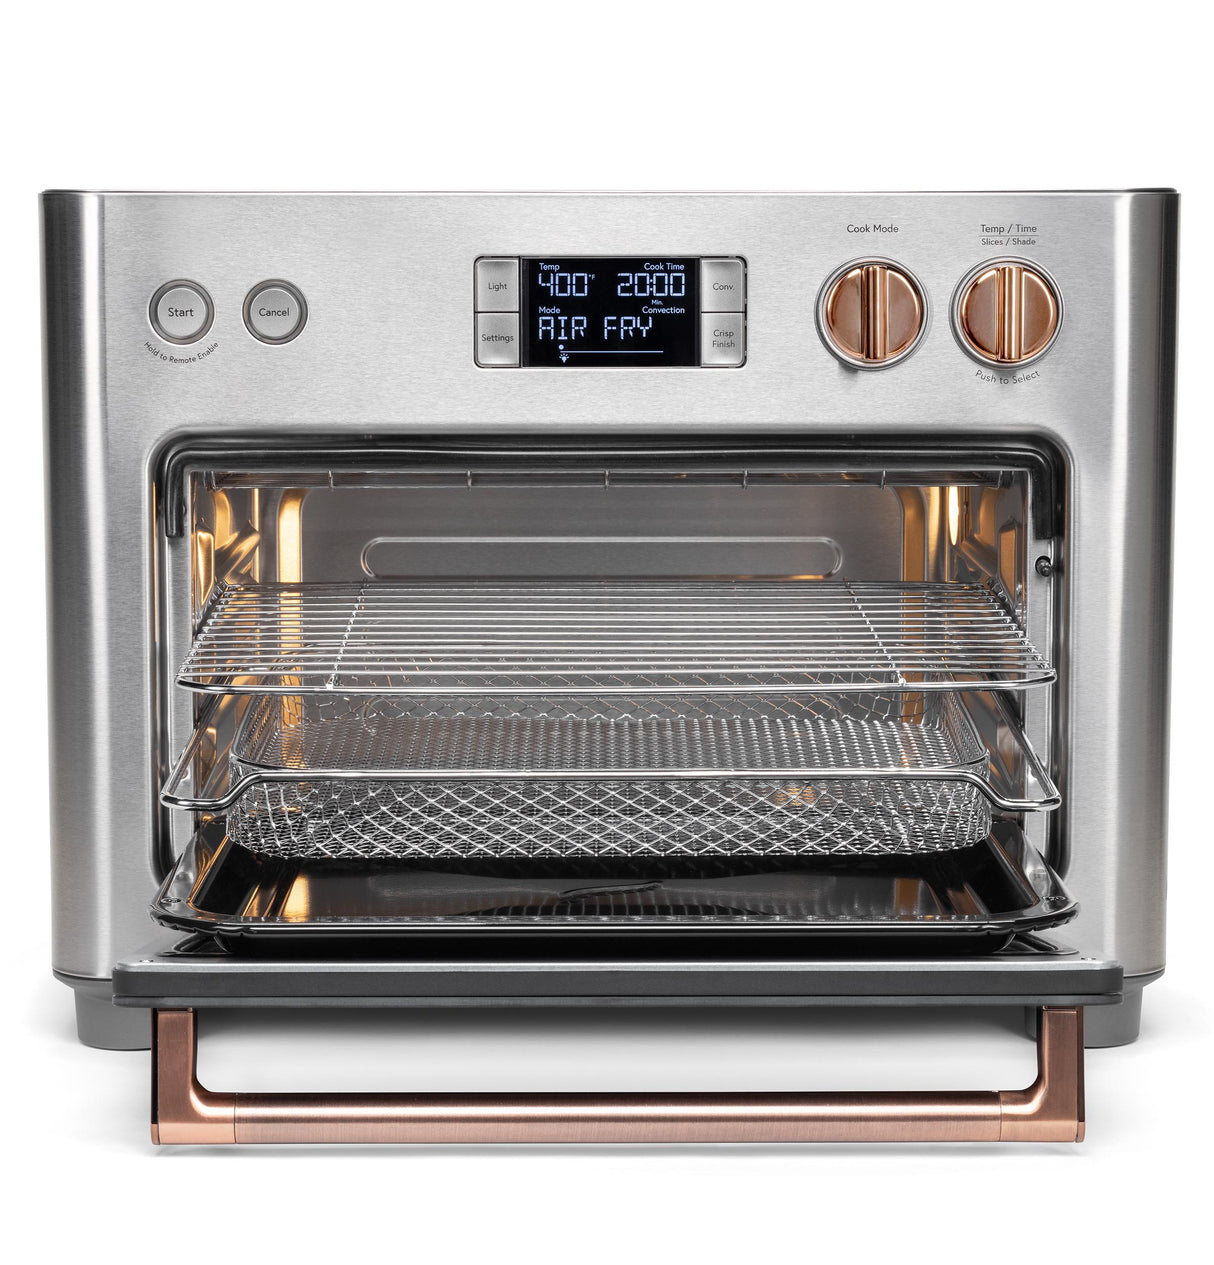 Caf(eback)(TM) Couture(TM) Oven with Air Fry - (C9OAAAS2RS3)